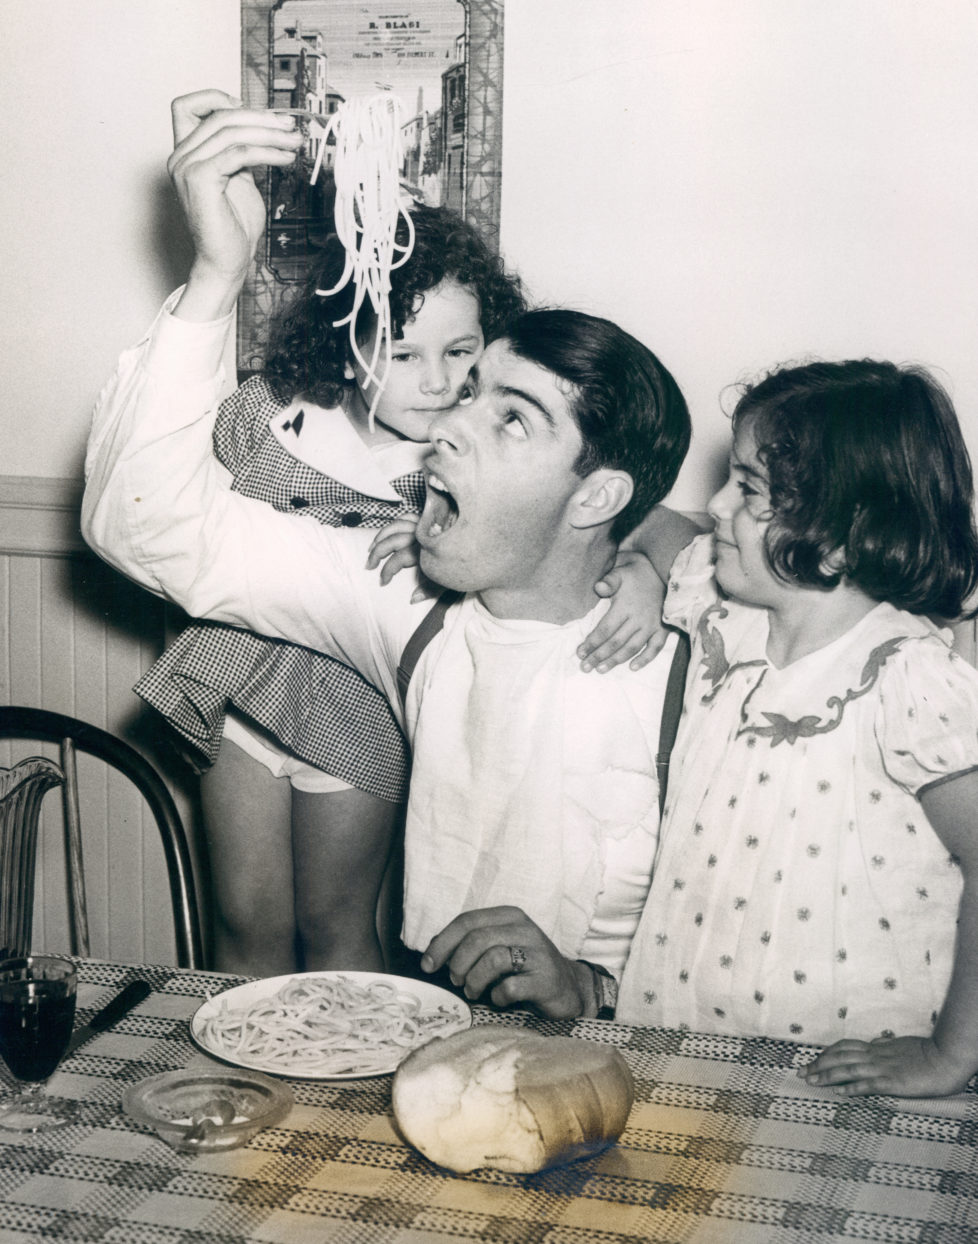 UNSPECIFIED - UNDATED: Joe DiMaggio eating pasta with a couple of young fans. (Photo by Sports Studio Photos/Getty Images)